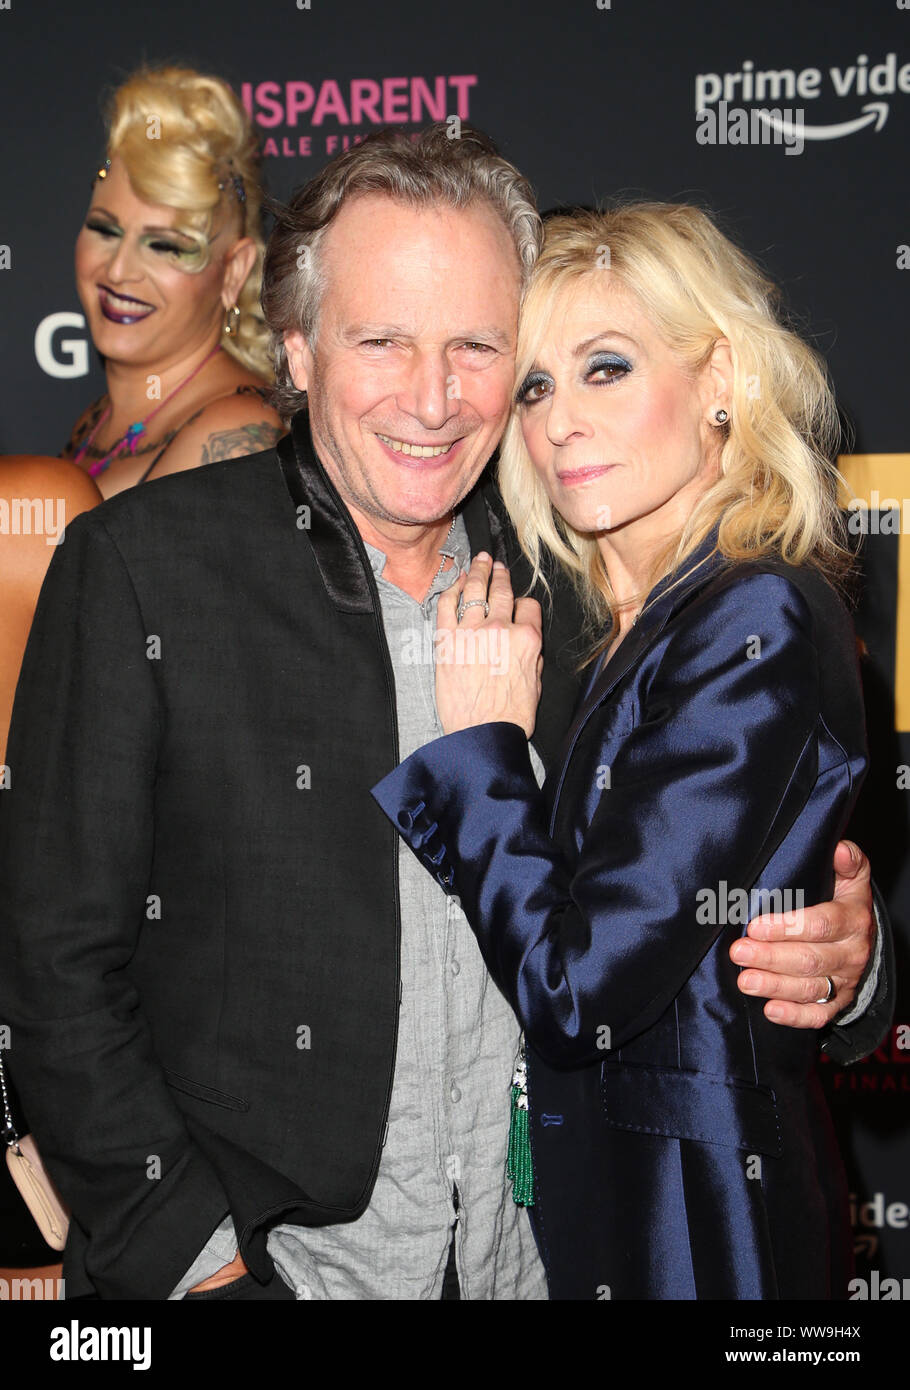 Los Angeles, Ca. 13th Sep, 2019. Judith Light, Robert Desiderio, at LA Premiere Of Amazon's 'Transparent Musicale Finale' at Regal Cinemas L.A. Live in Los Angeles, California on September 13, 2019. Credit: Faye Sadou/Media Punch/Alamy Live News Stock Photo